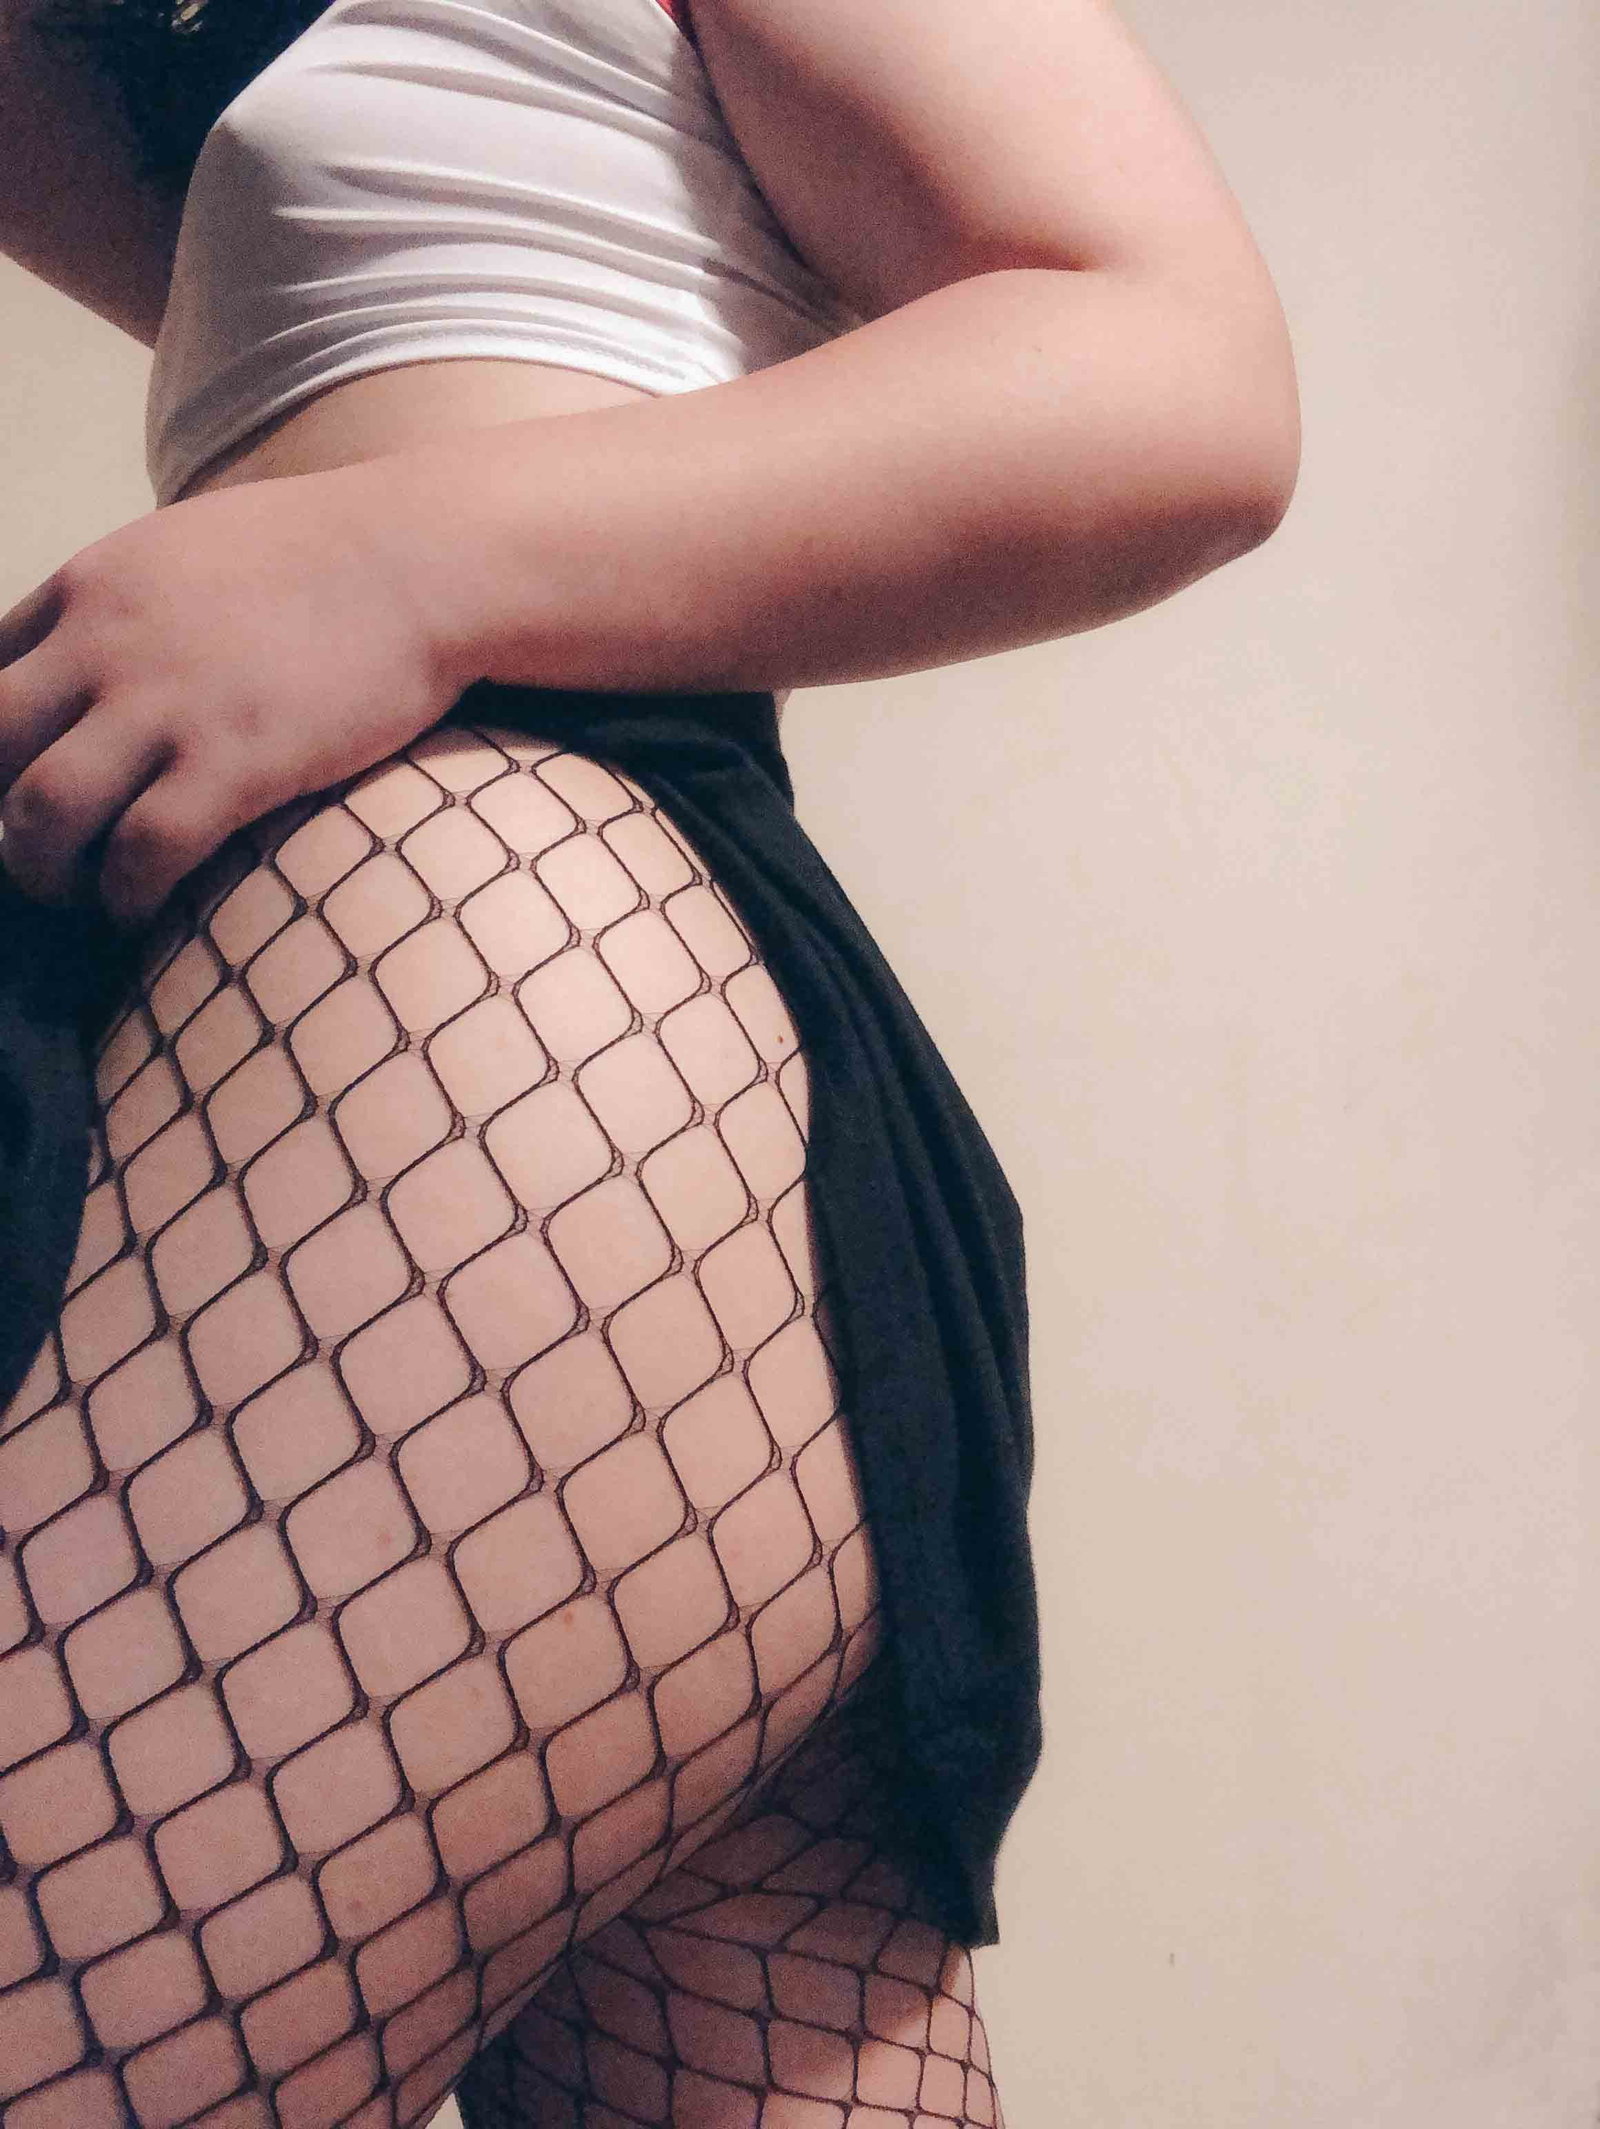 Photo by dungeonsnpetals with the username @dungeonsnpetals,  November 19, 2020 at 4:30 PM. The post is about the topic Fishnet Clothing